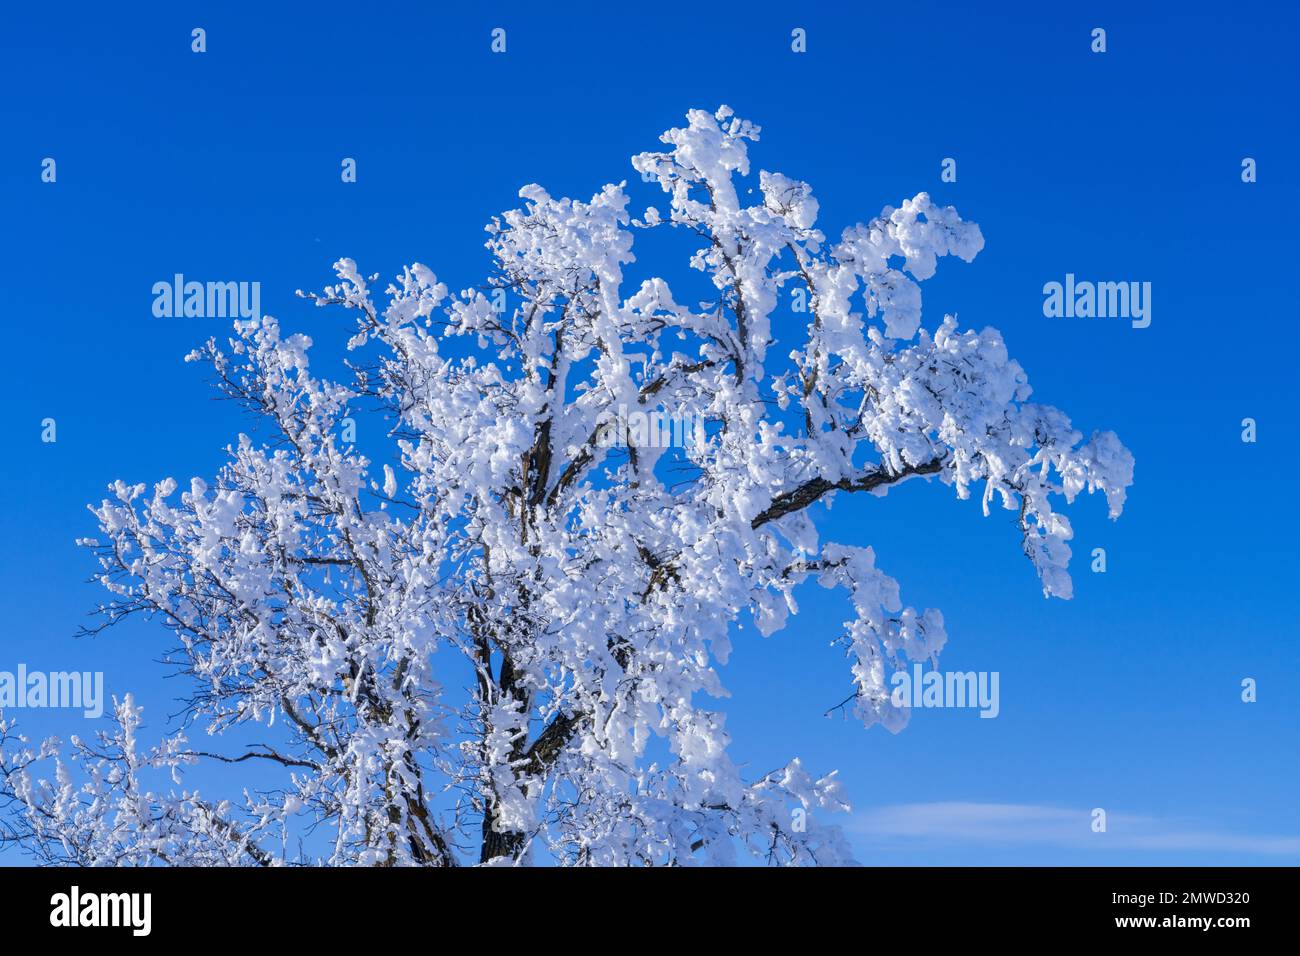 Trees covered in winter hoar frost near the village of St. Leon, Manitoba, Canada. Stock Photo